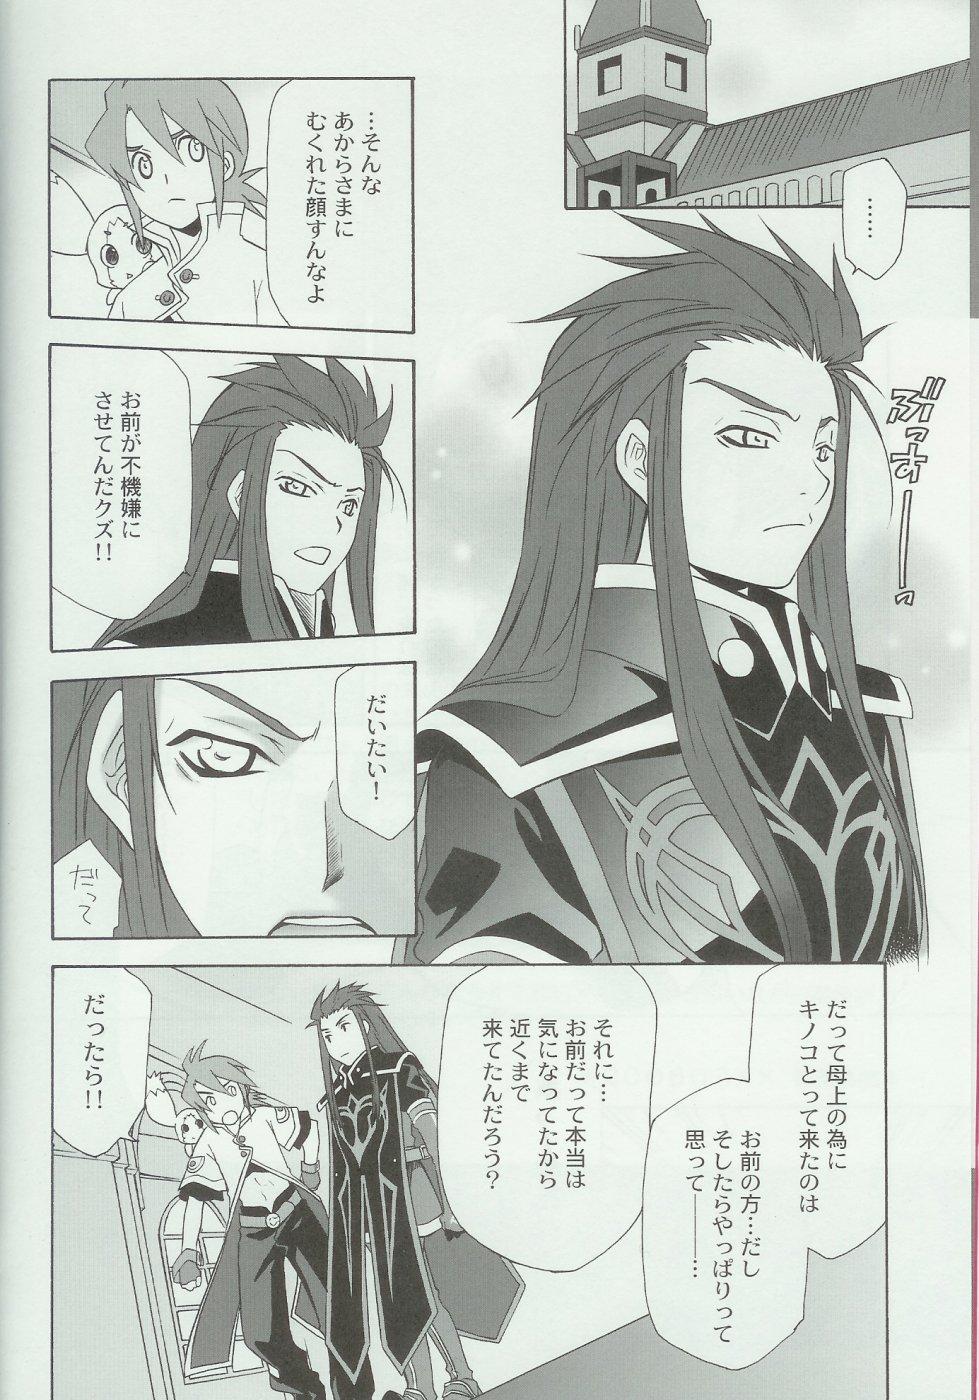 Tesao flirt - Tales of the abyss Homosexual - Page 3